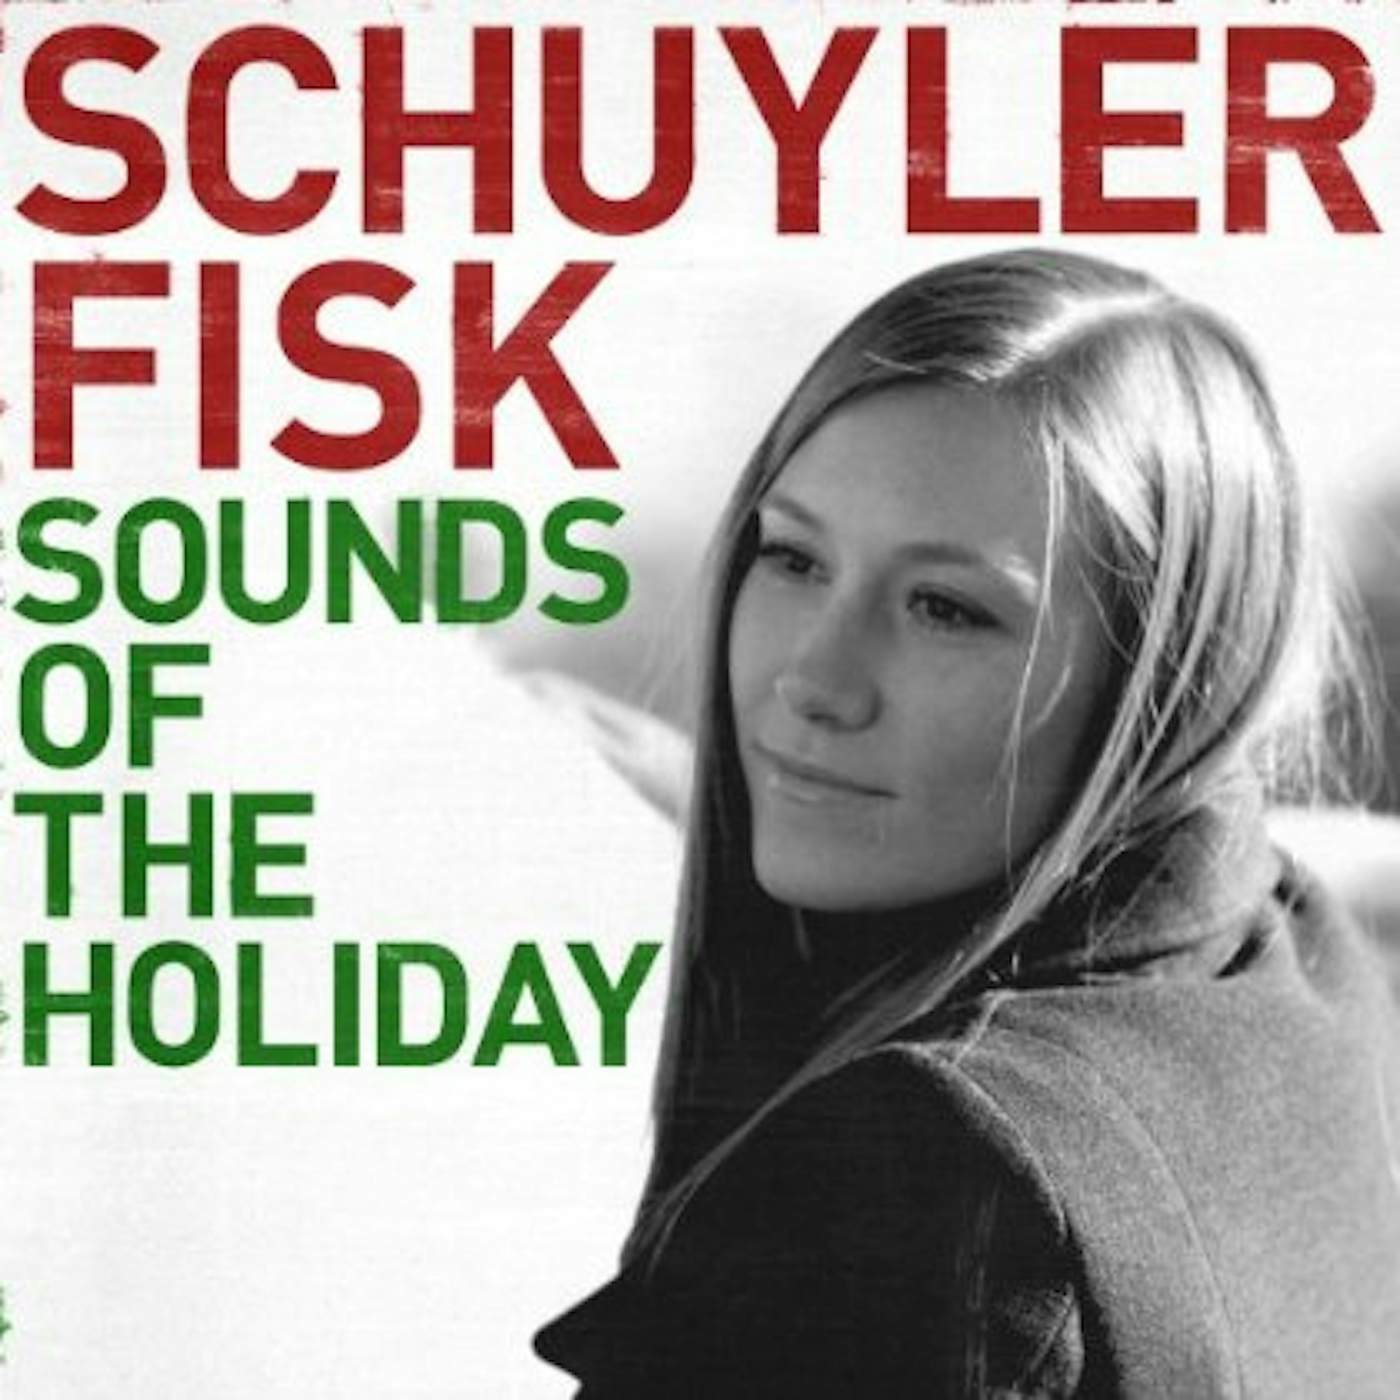 Schuyler Fisk SOUNDS OF THE HOLIDAY CD